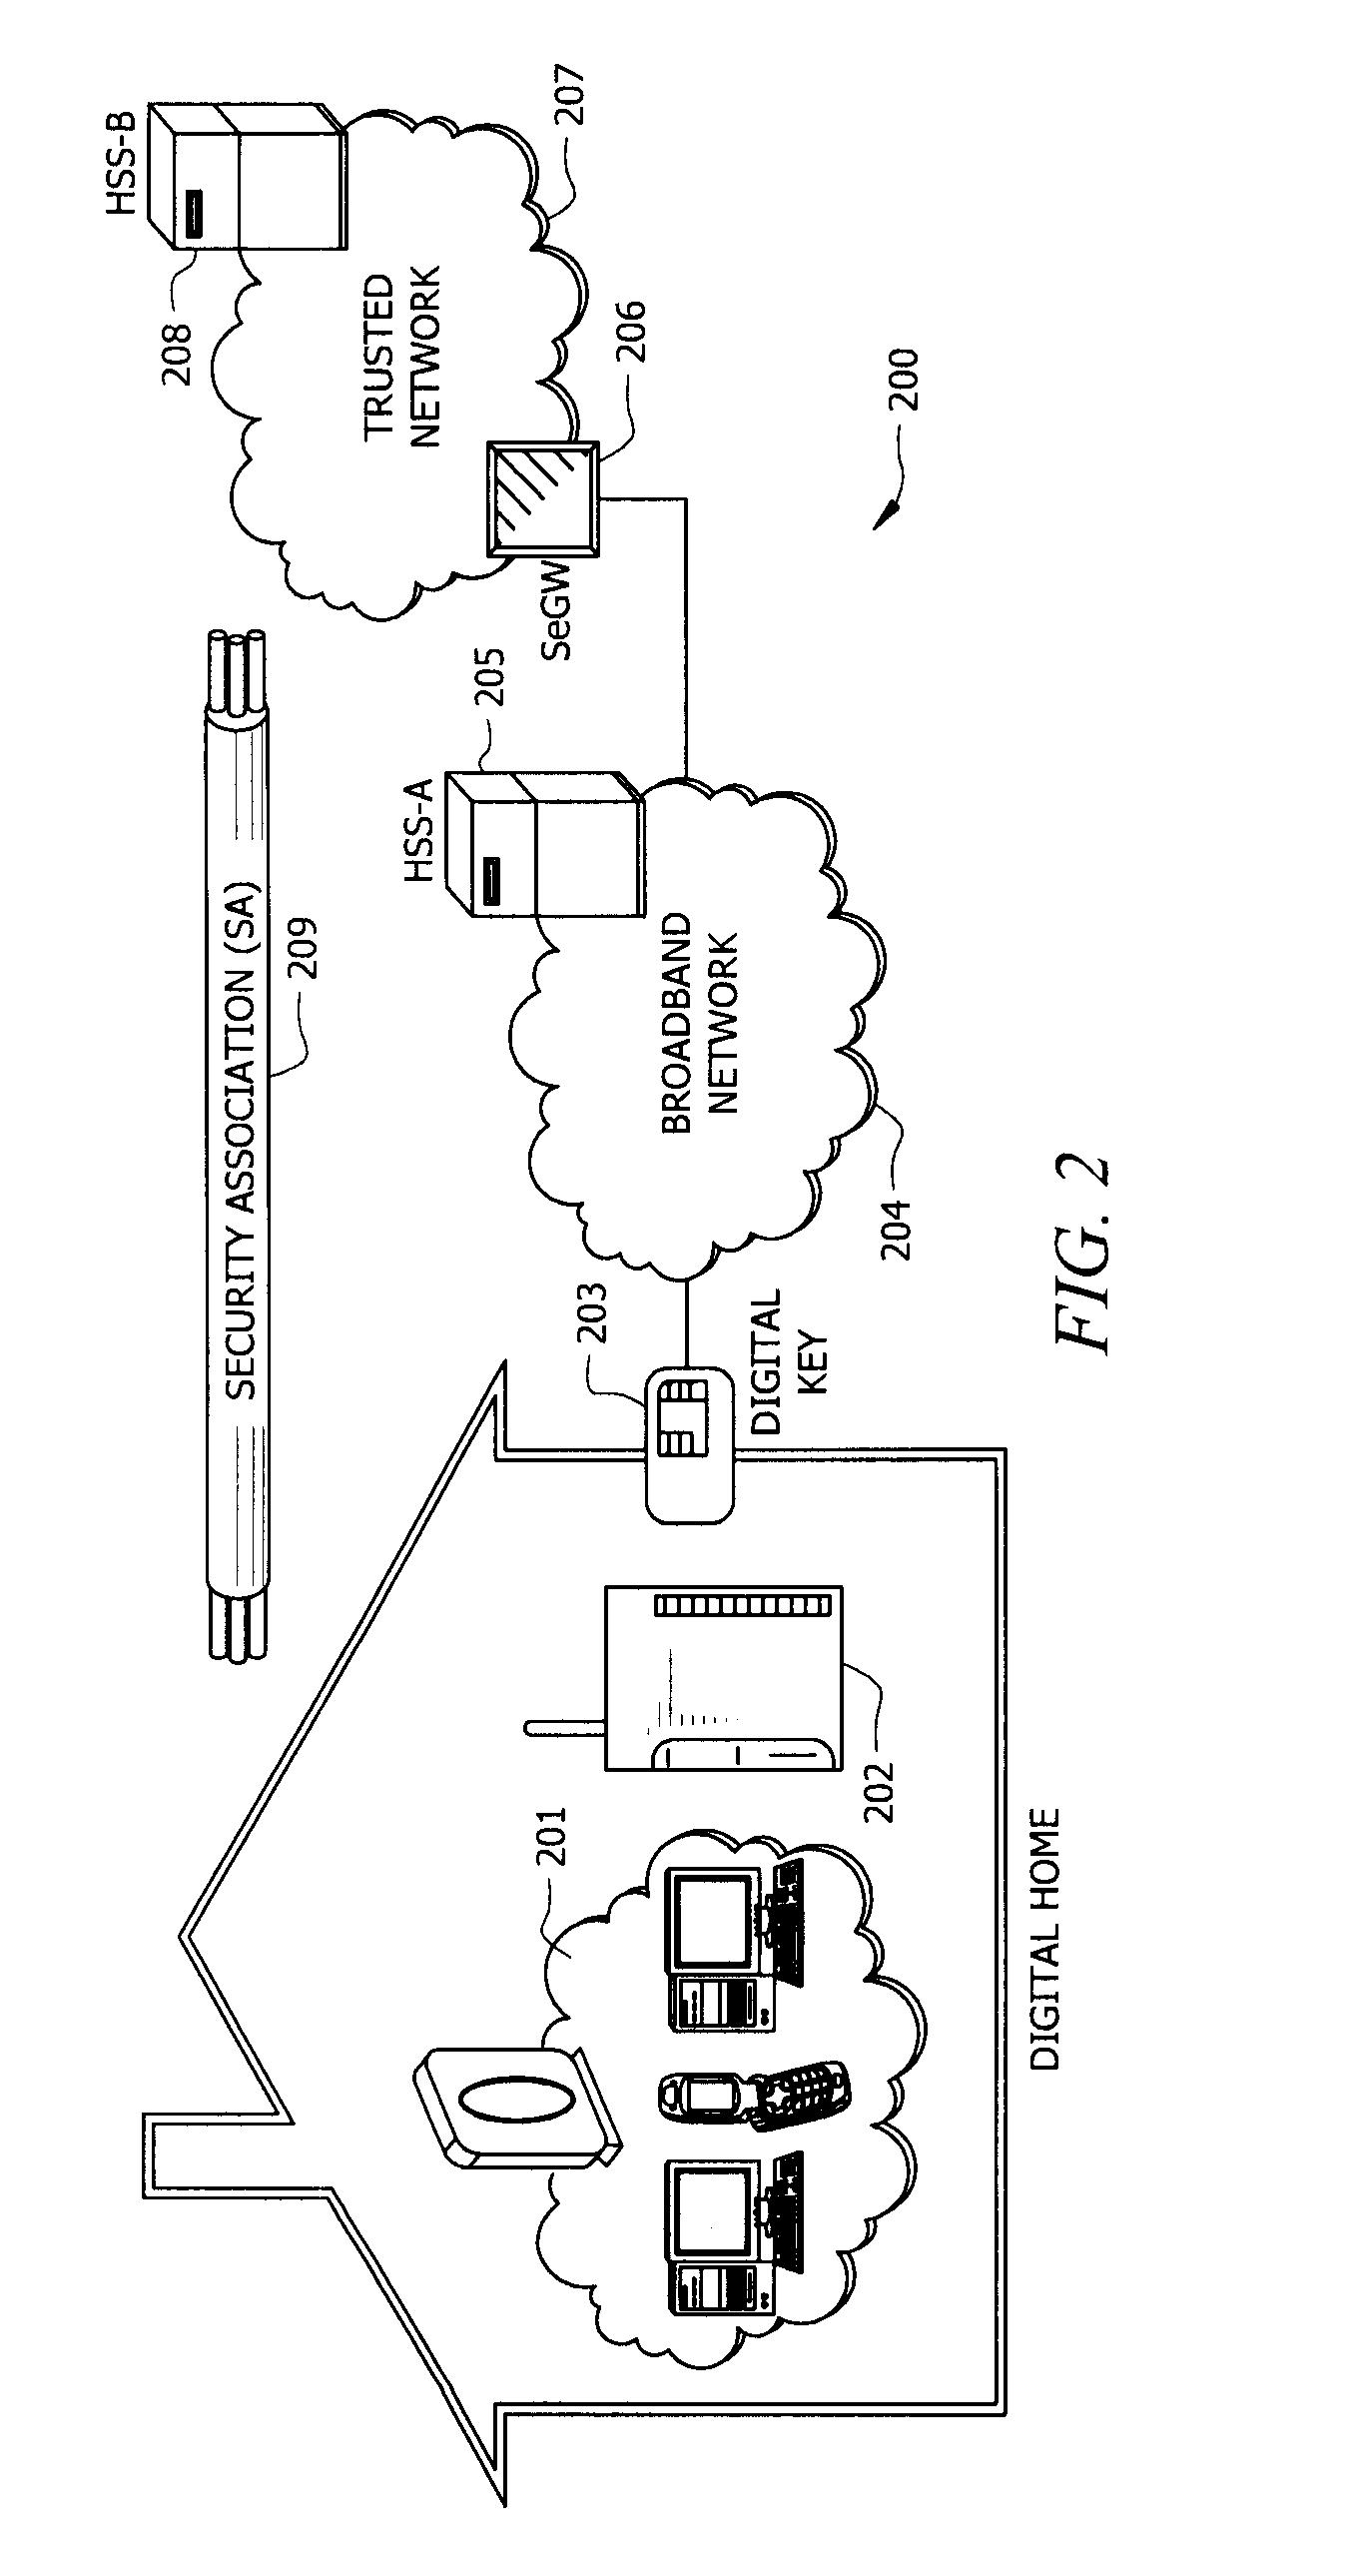 System and method for providing cellular access points